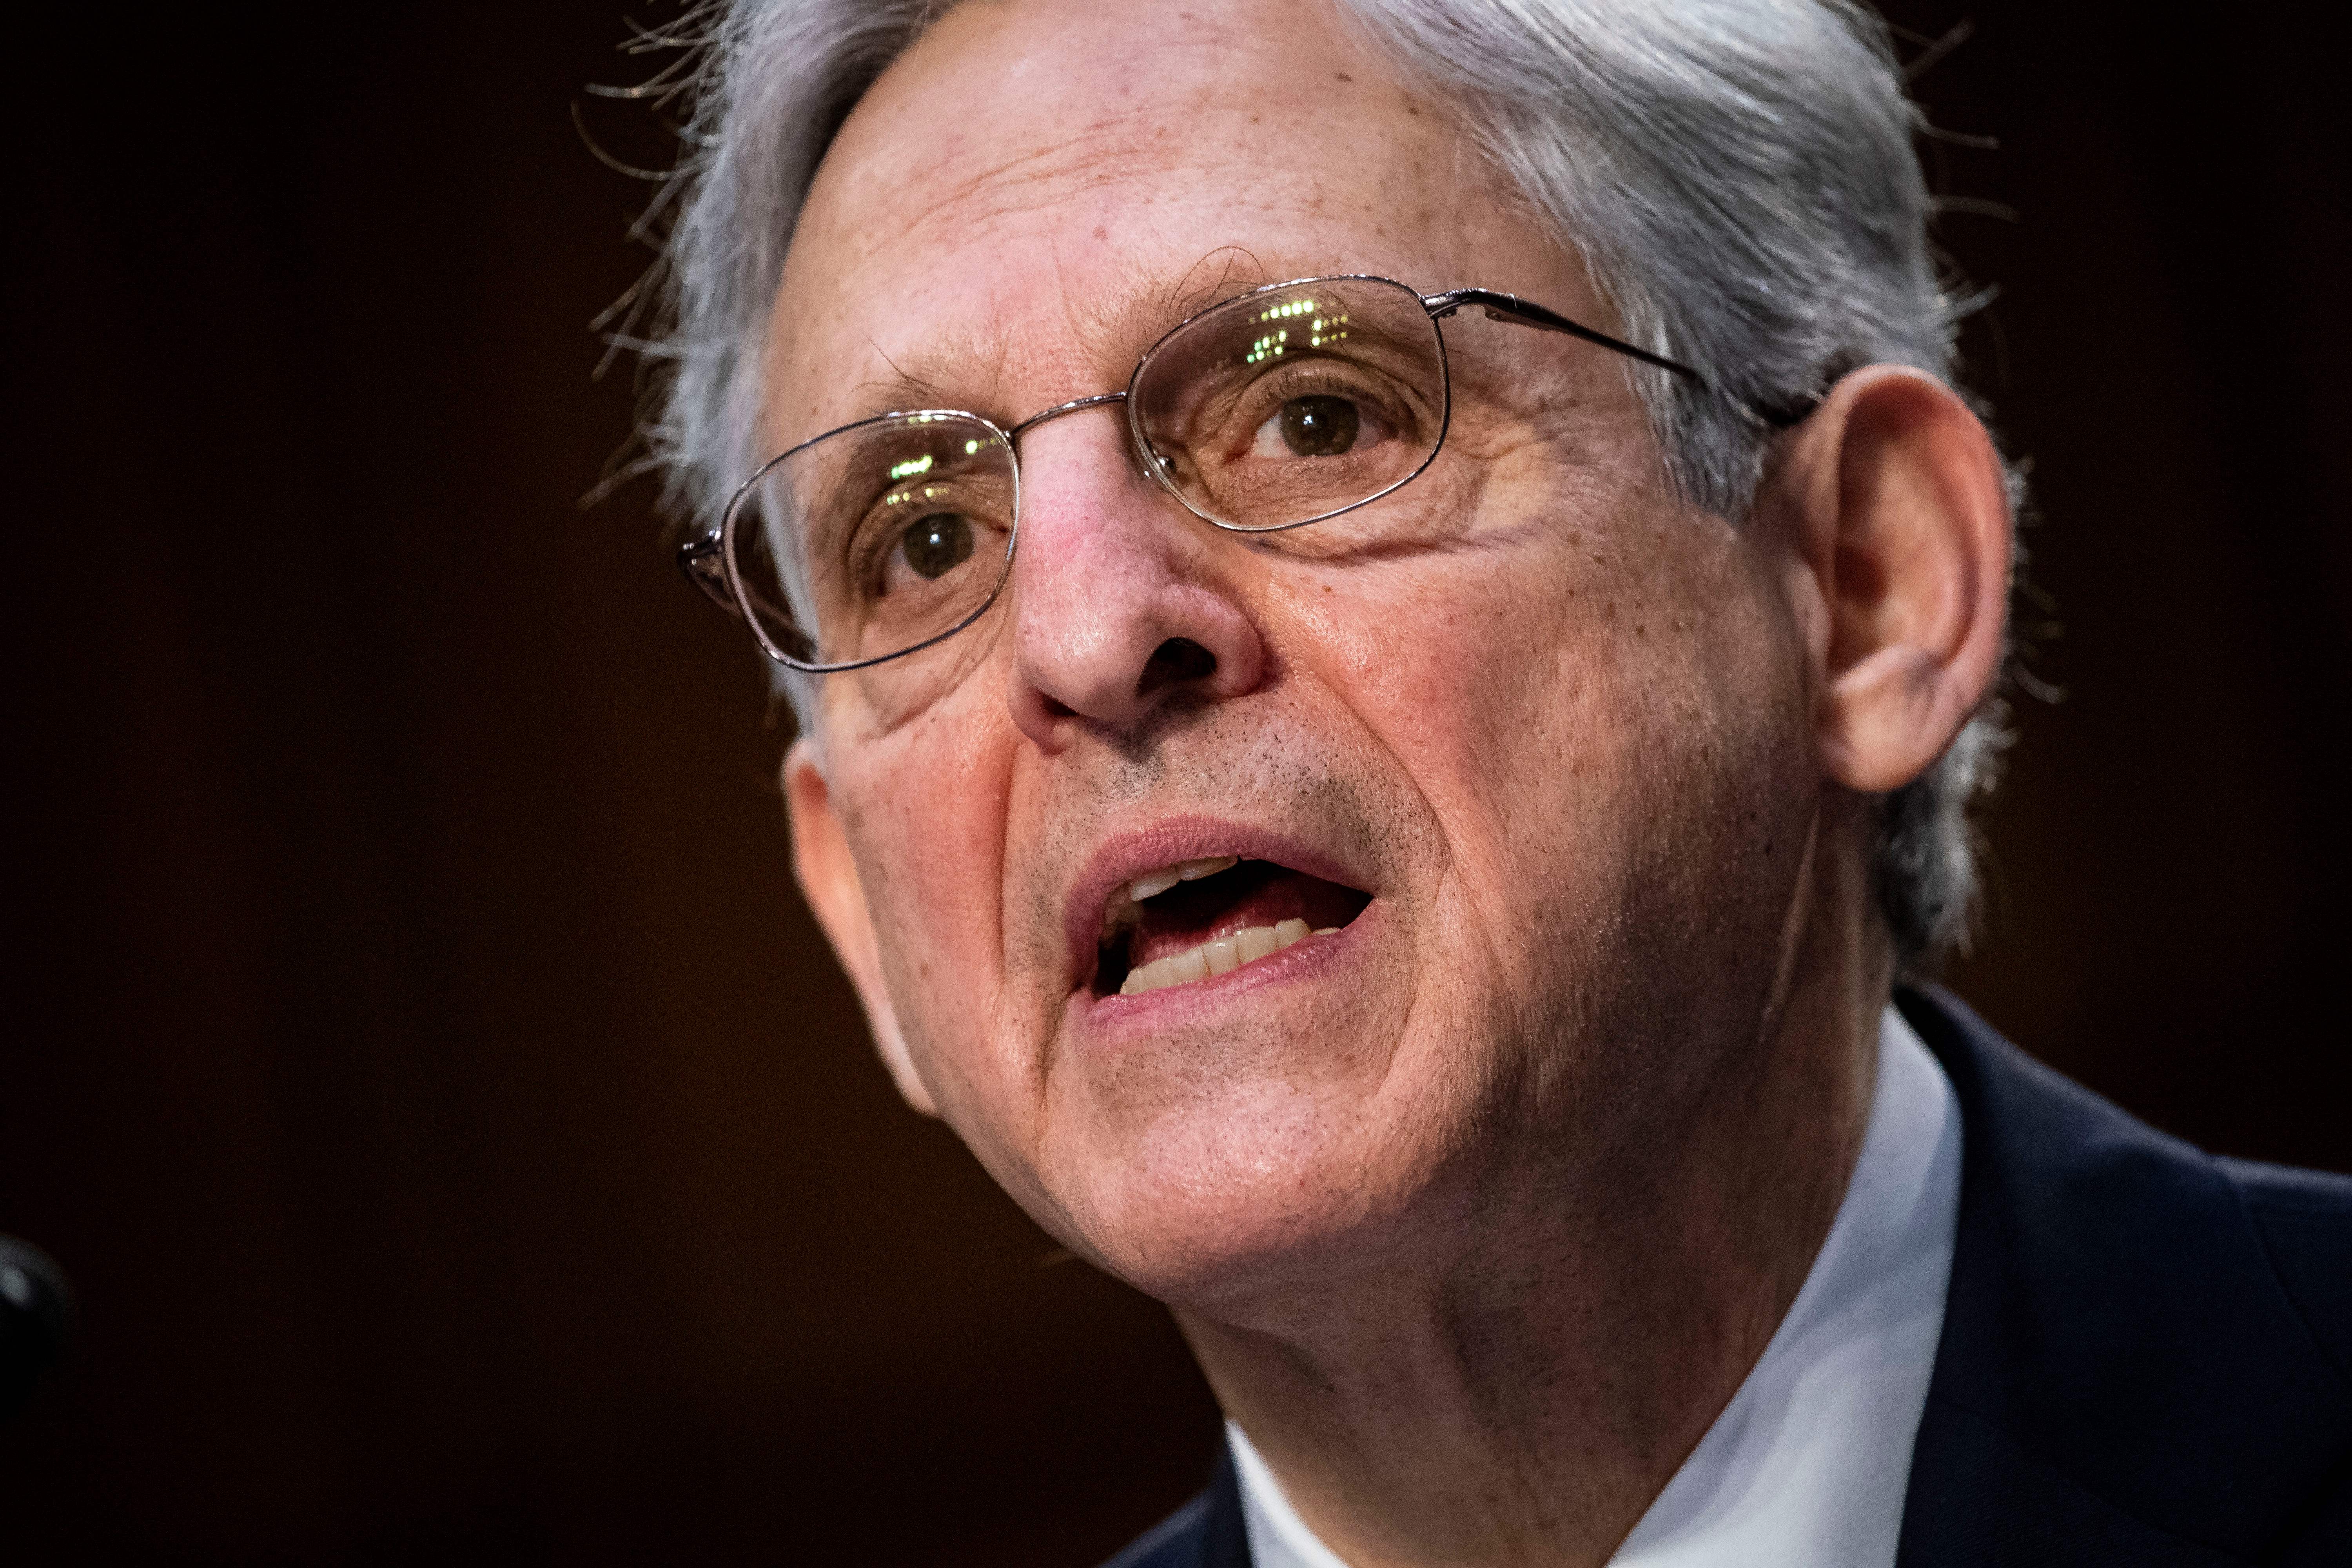 Attorney General Merrick Garland on Capitol Hill in Washington, D.C. (Photo by AL DRAGO/POOL/AFP via Getty Images)